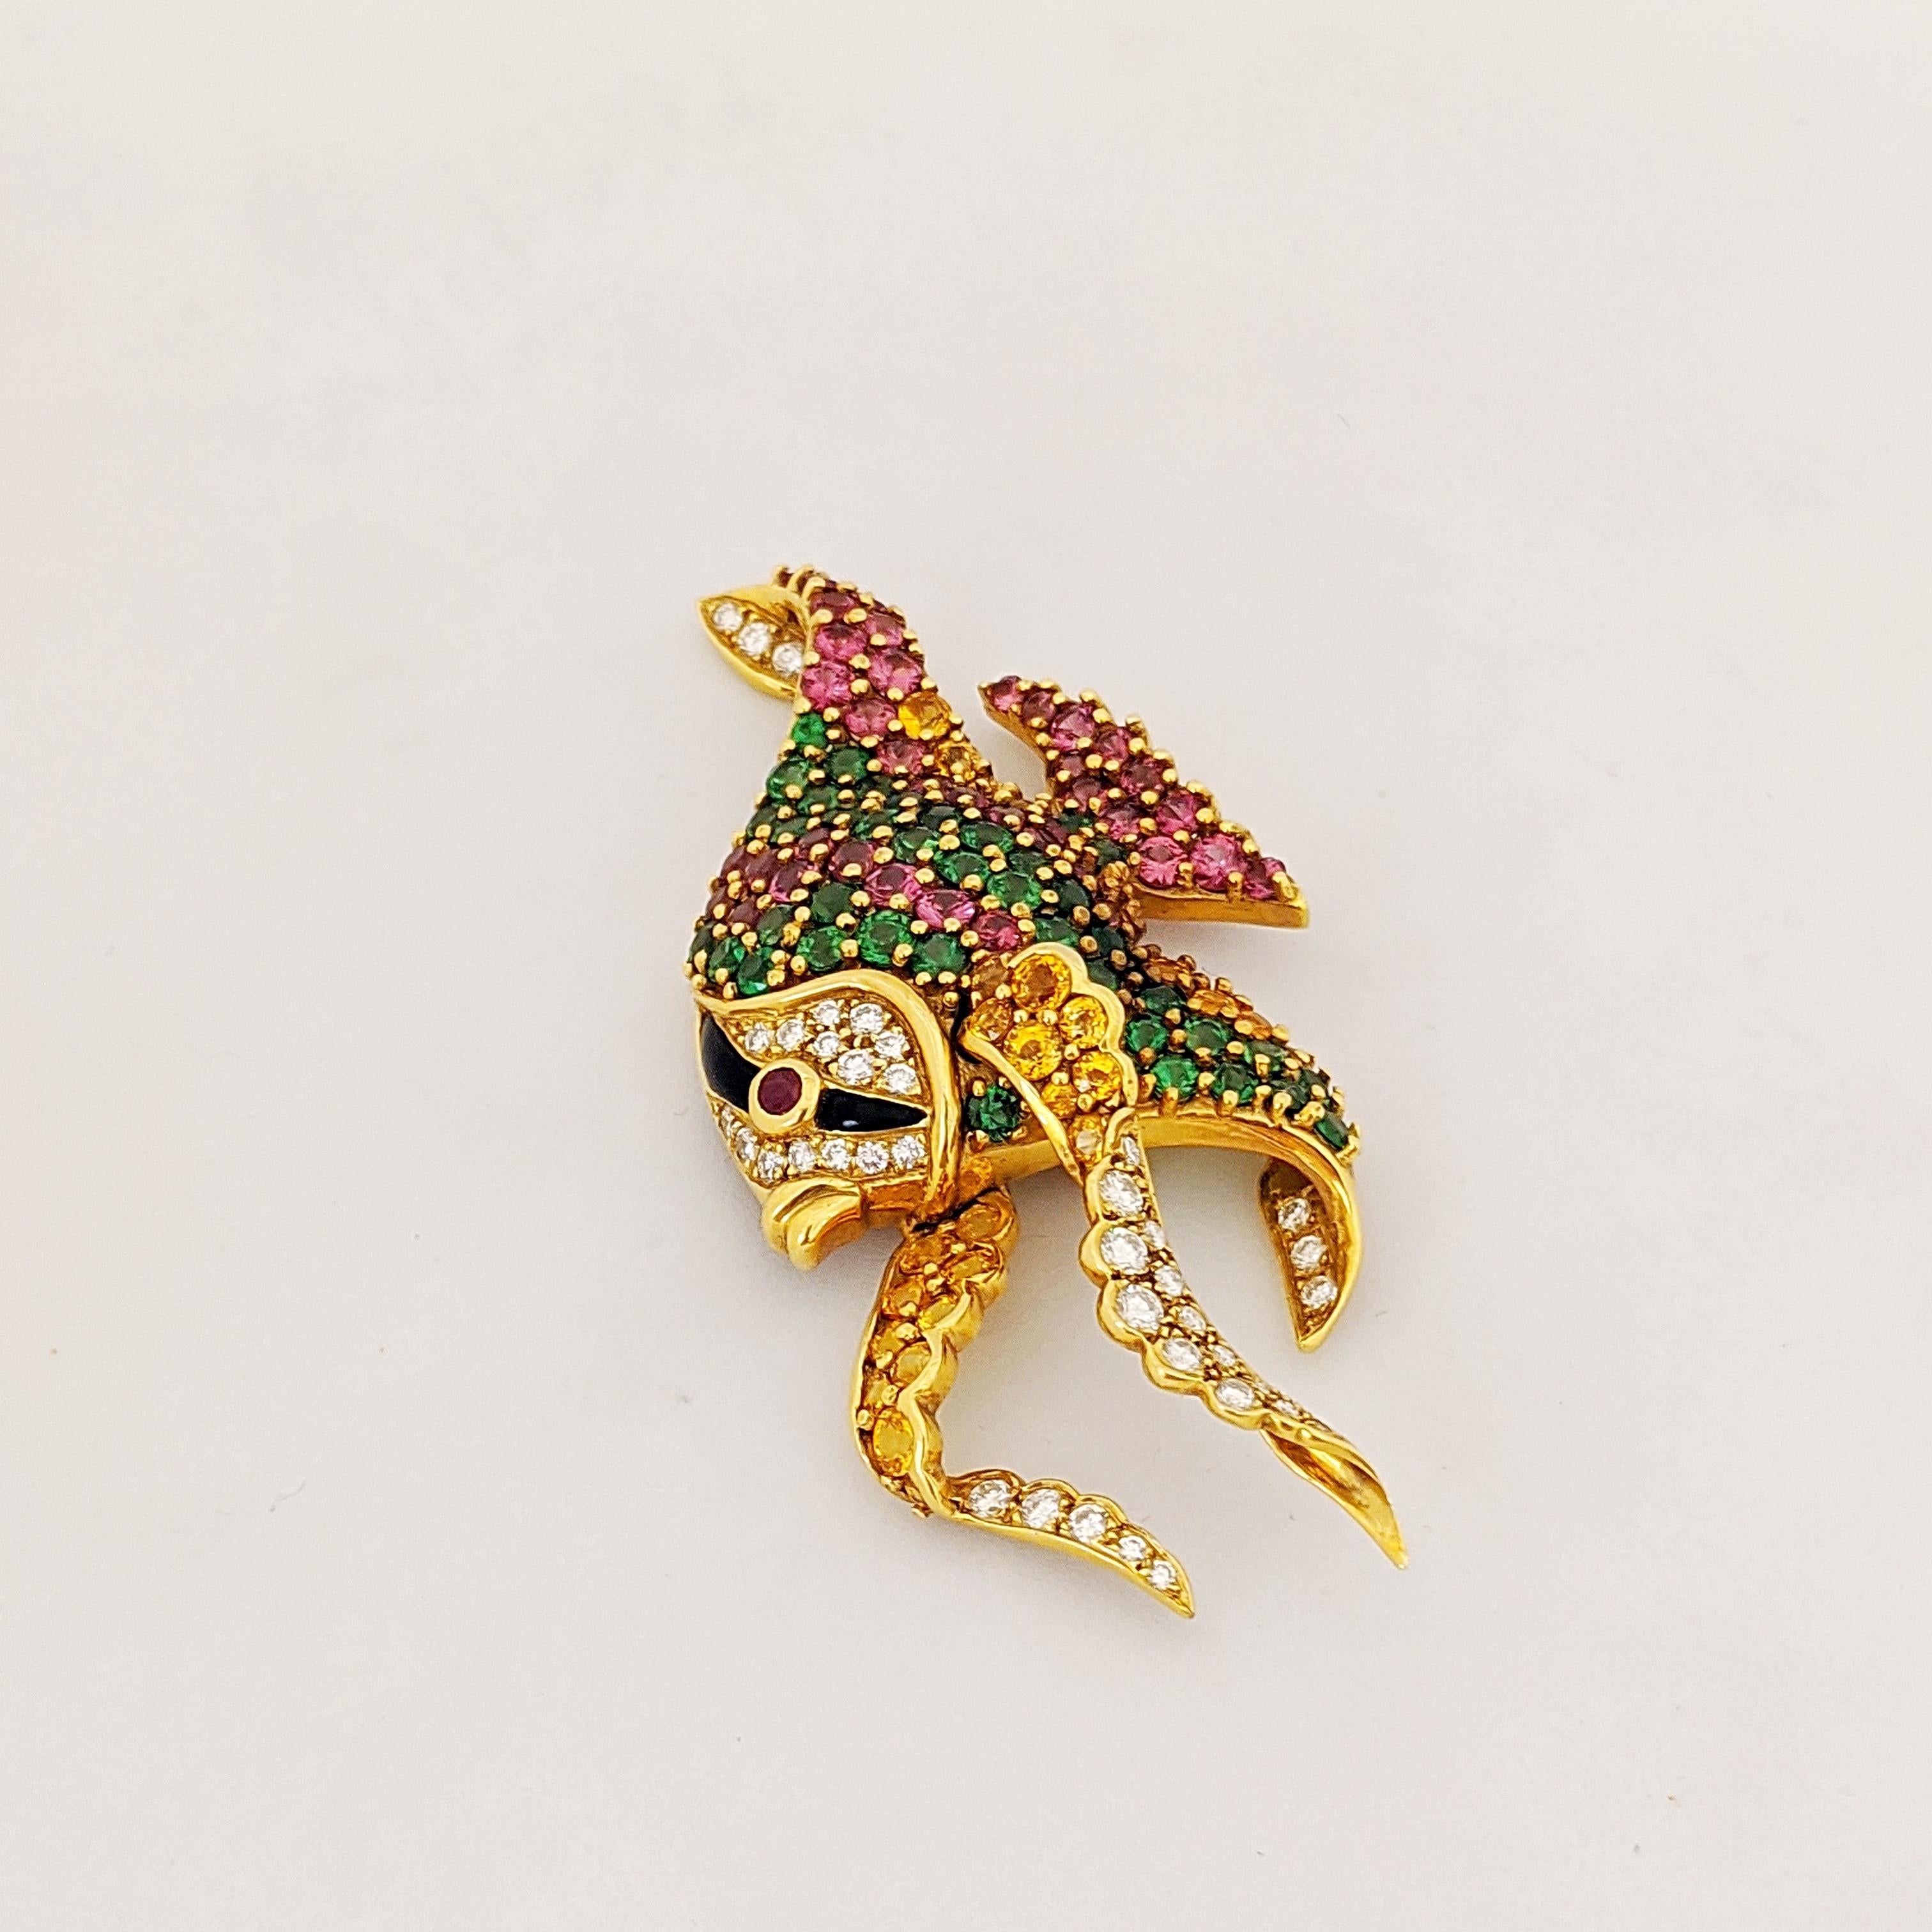 Designed as an angelfish, the body is set with stripes of circular-cut yellow sapphires, pink garnets, and tsavorites. The head with pavé-set diamonds, black onyx stripe and circular-cut ruby eye. The fins are bezel set circular-cut diamonds and